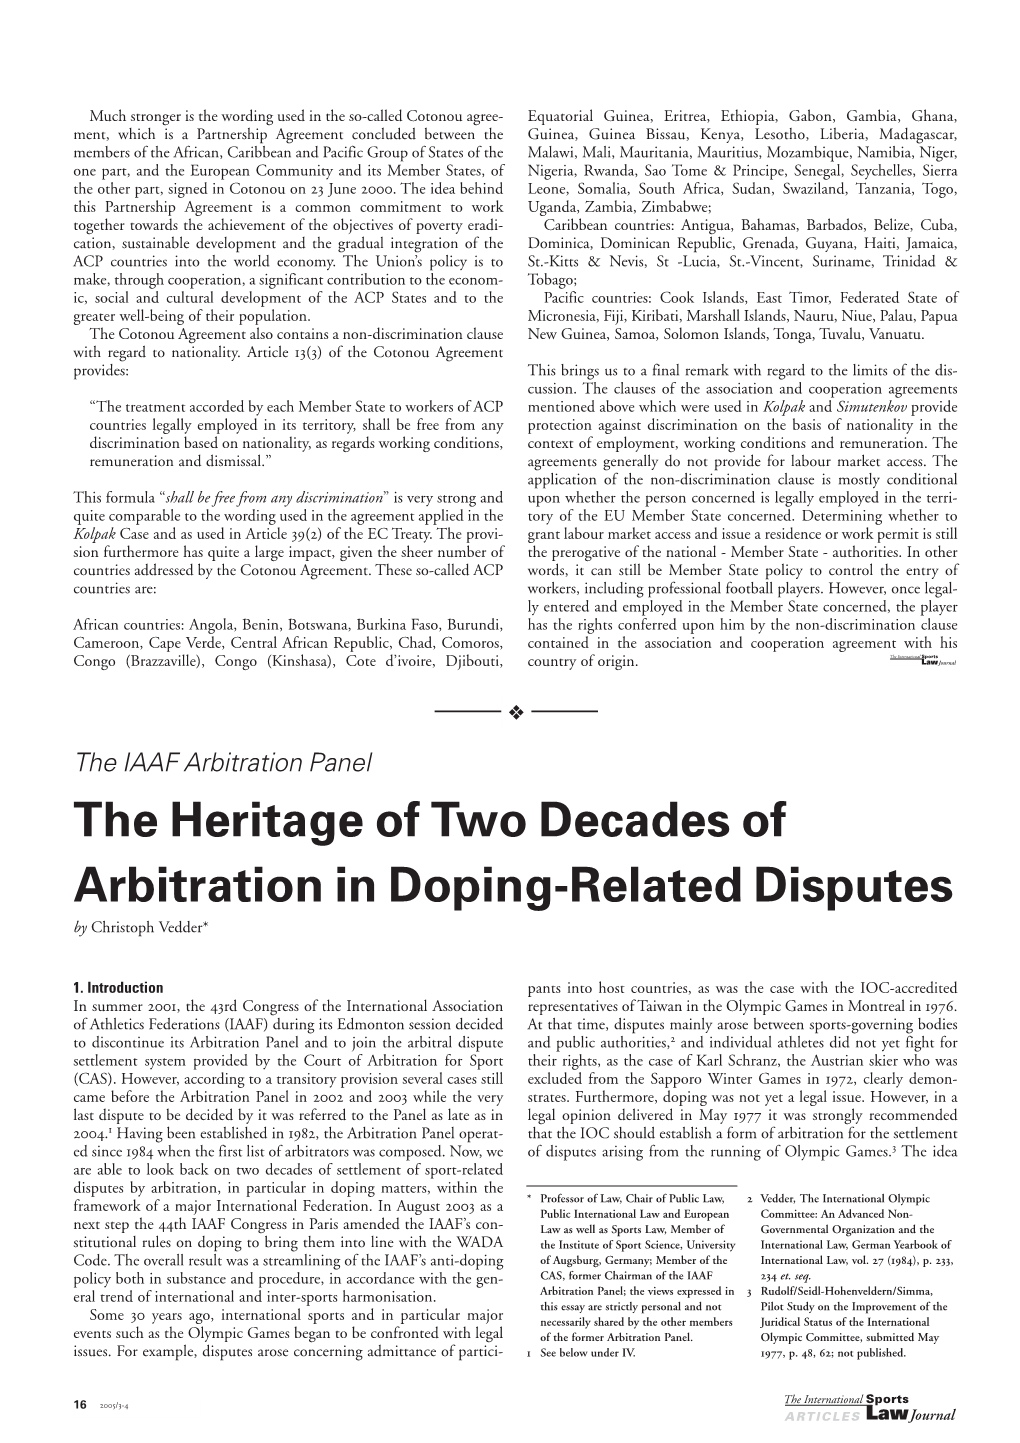 The Heritage of Two Decades of Arbitration in Doping-Related Disputes by Christoph Vedder*